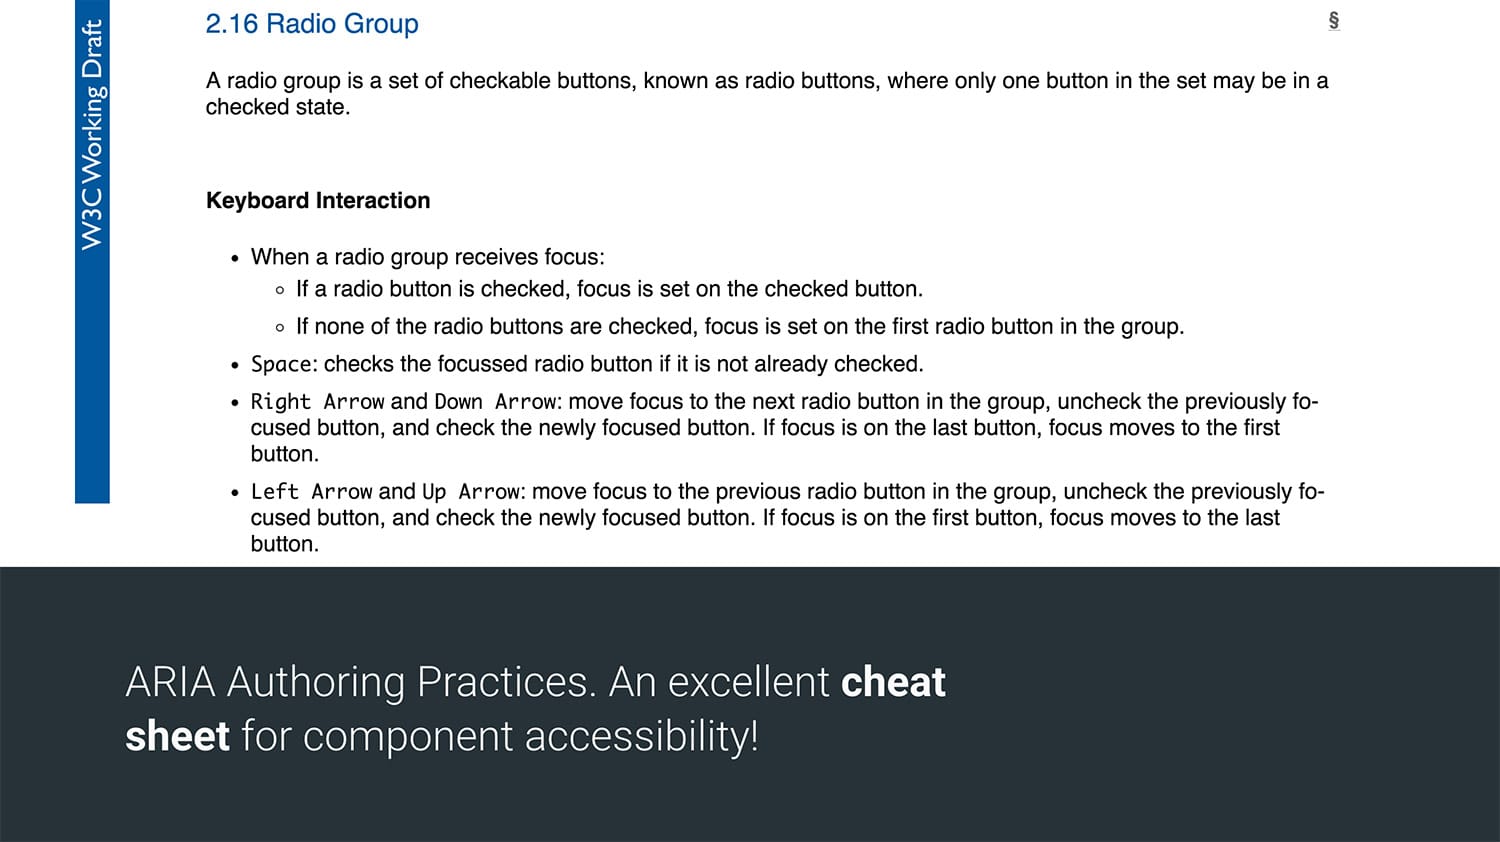 An excerpt from the ARIA Authoring Practices guide explaining how to build a radio group.